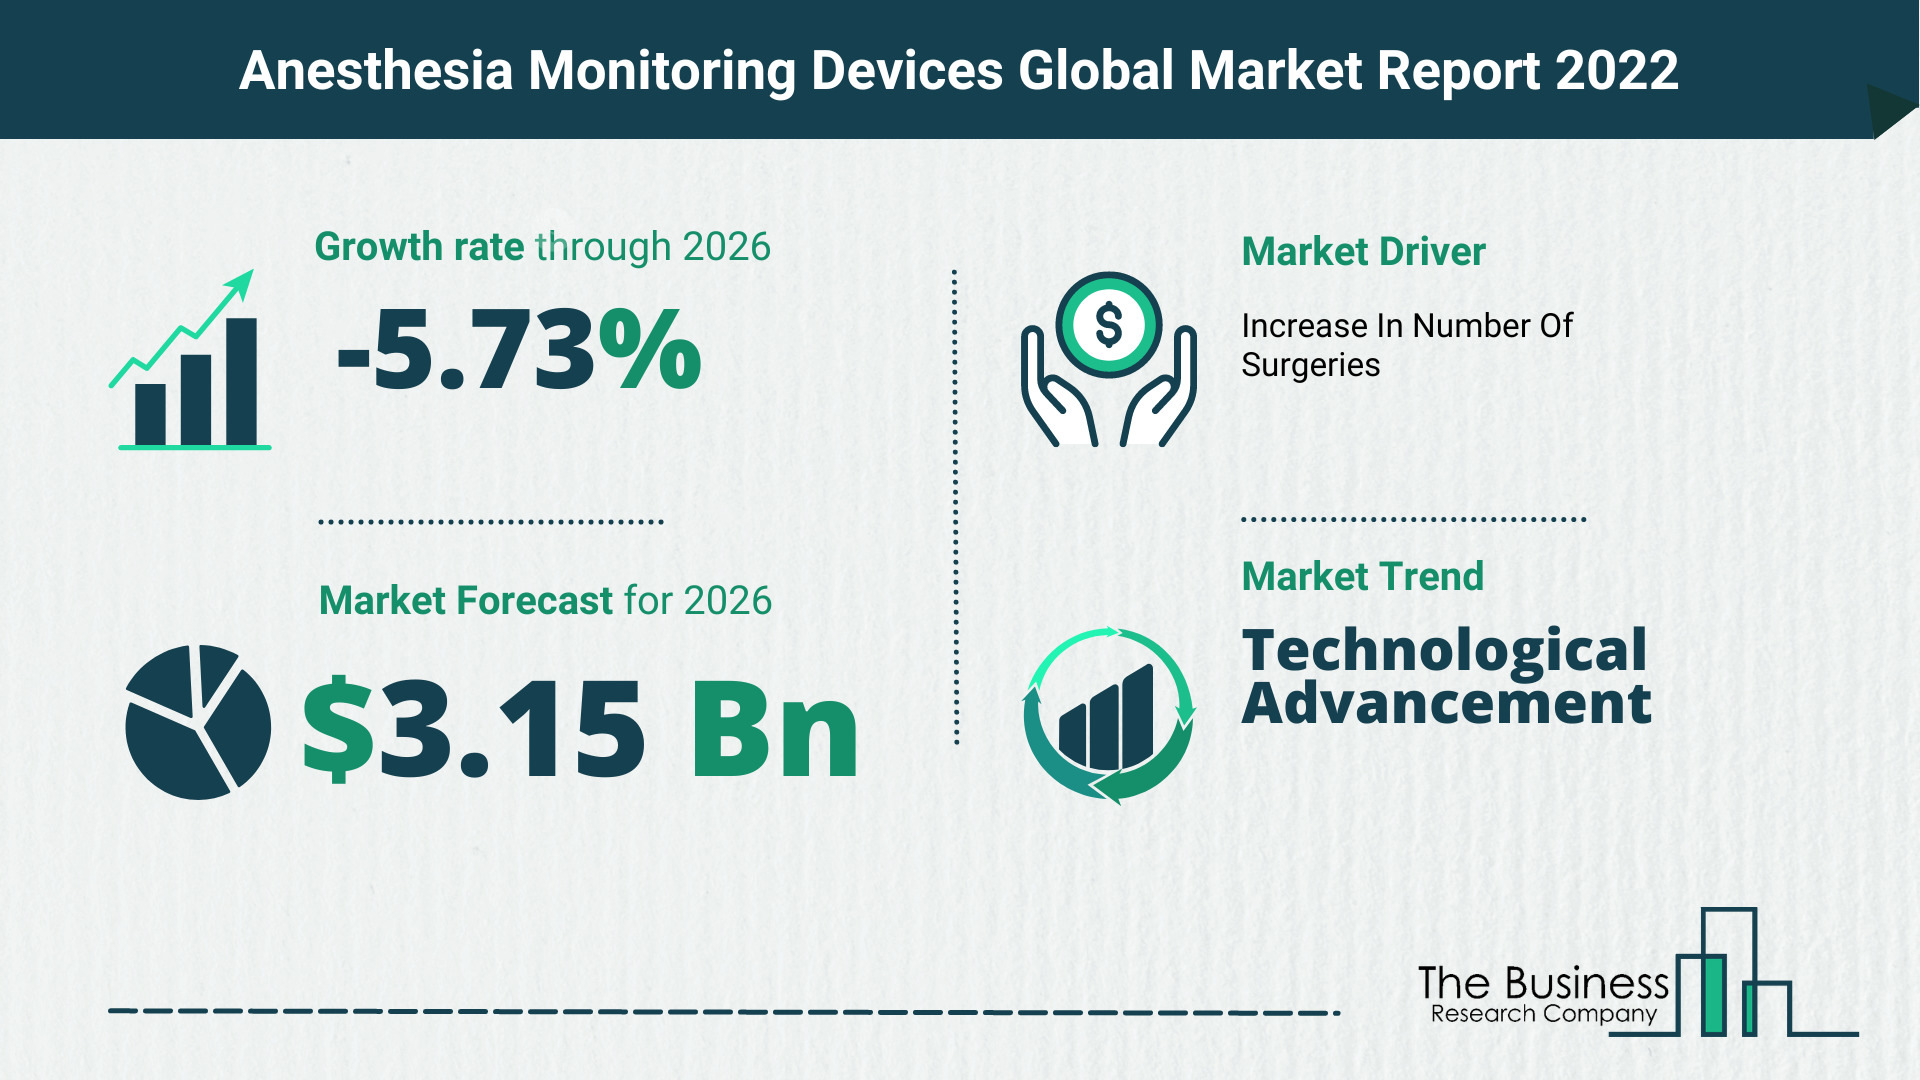 What Is The Anesthesia Monitoring Devices Market Overview In 2022?